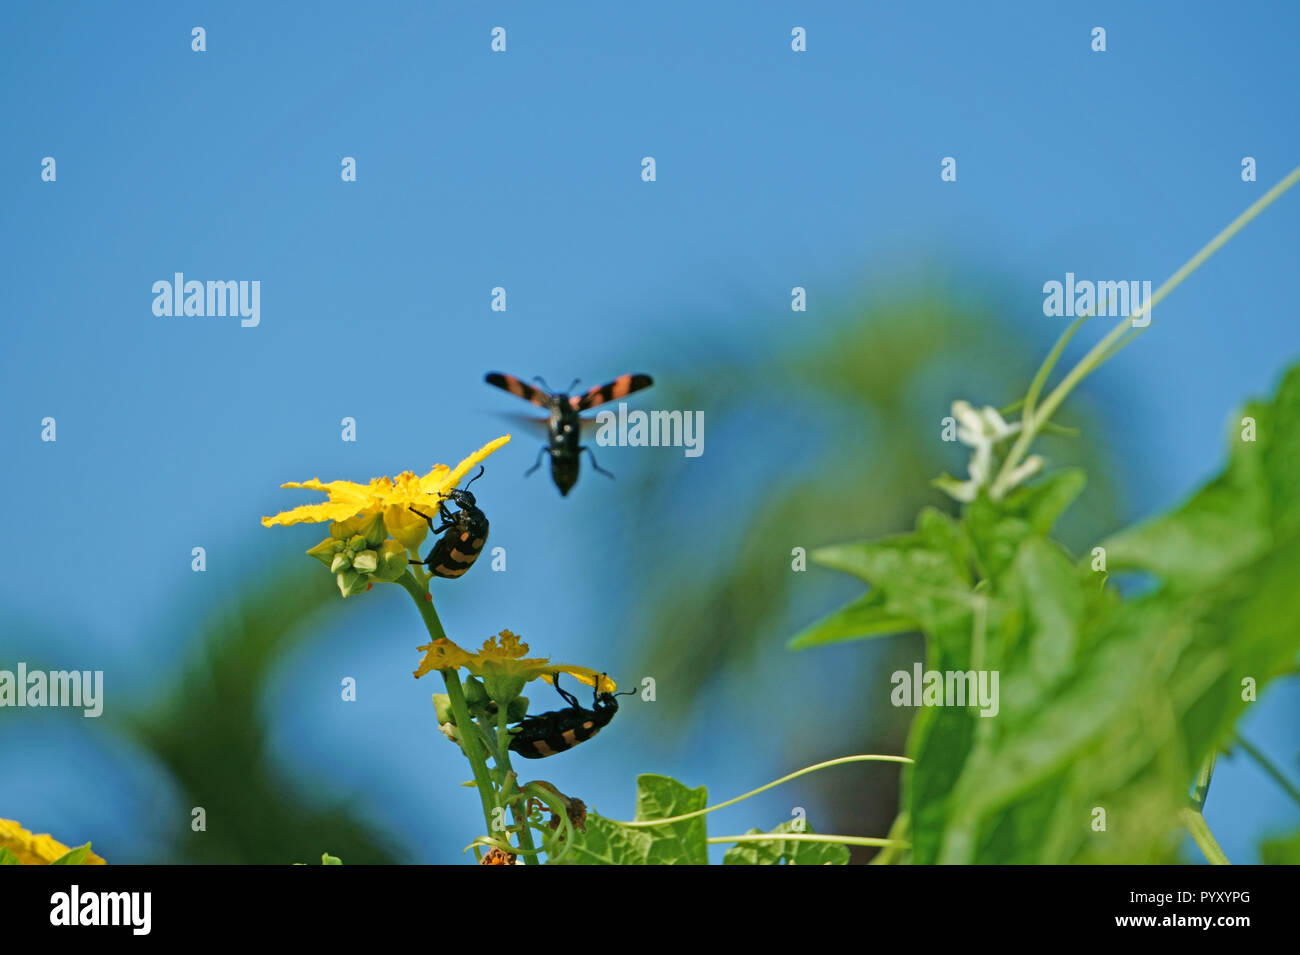 Orange blister beetle and luffa cylindrica flower against the blue sky Stock Photo